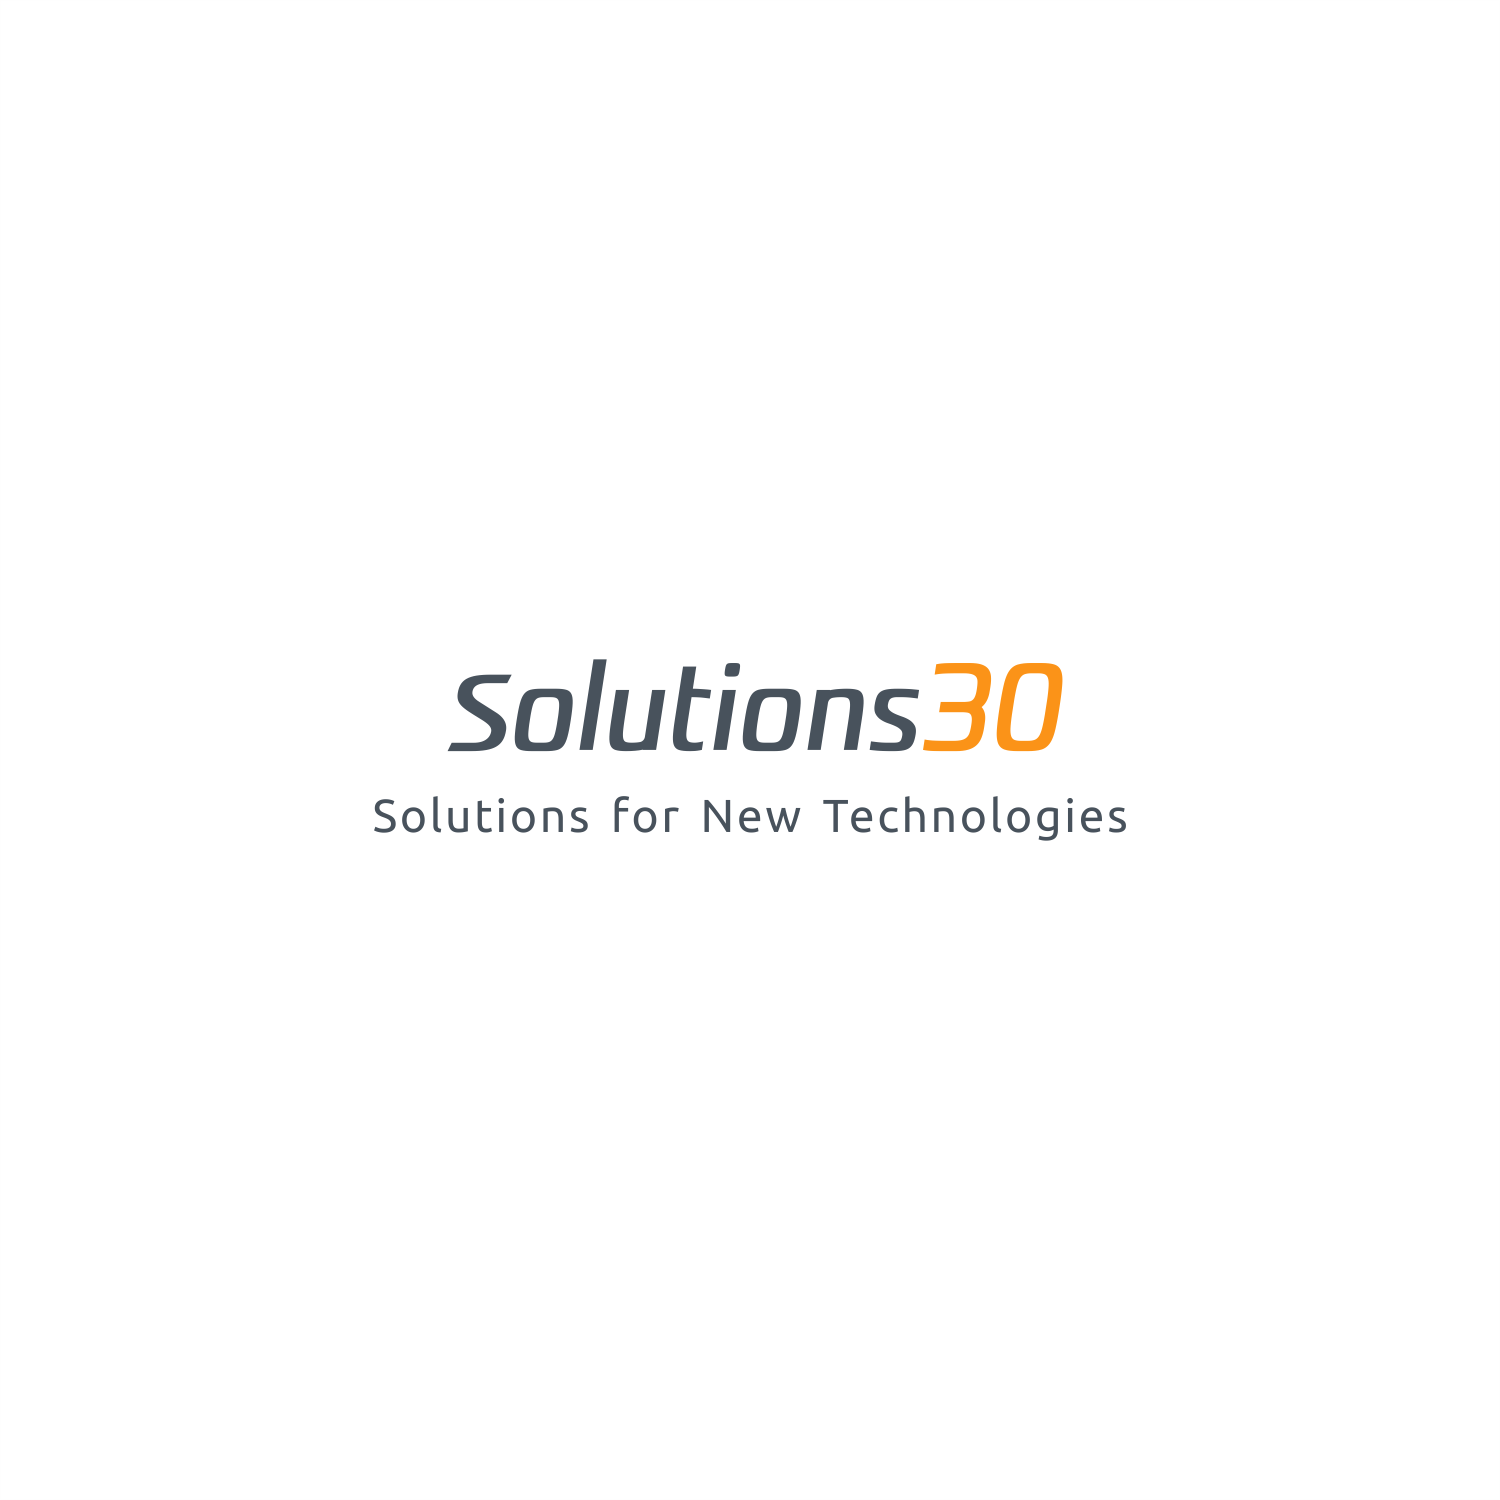 SOLUTIONS 30 : H1 20